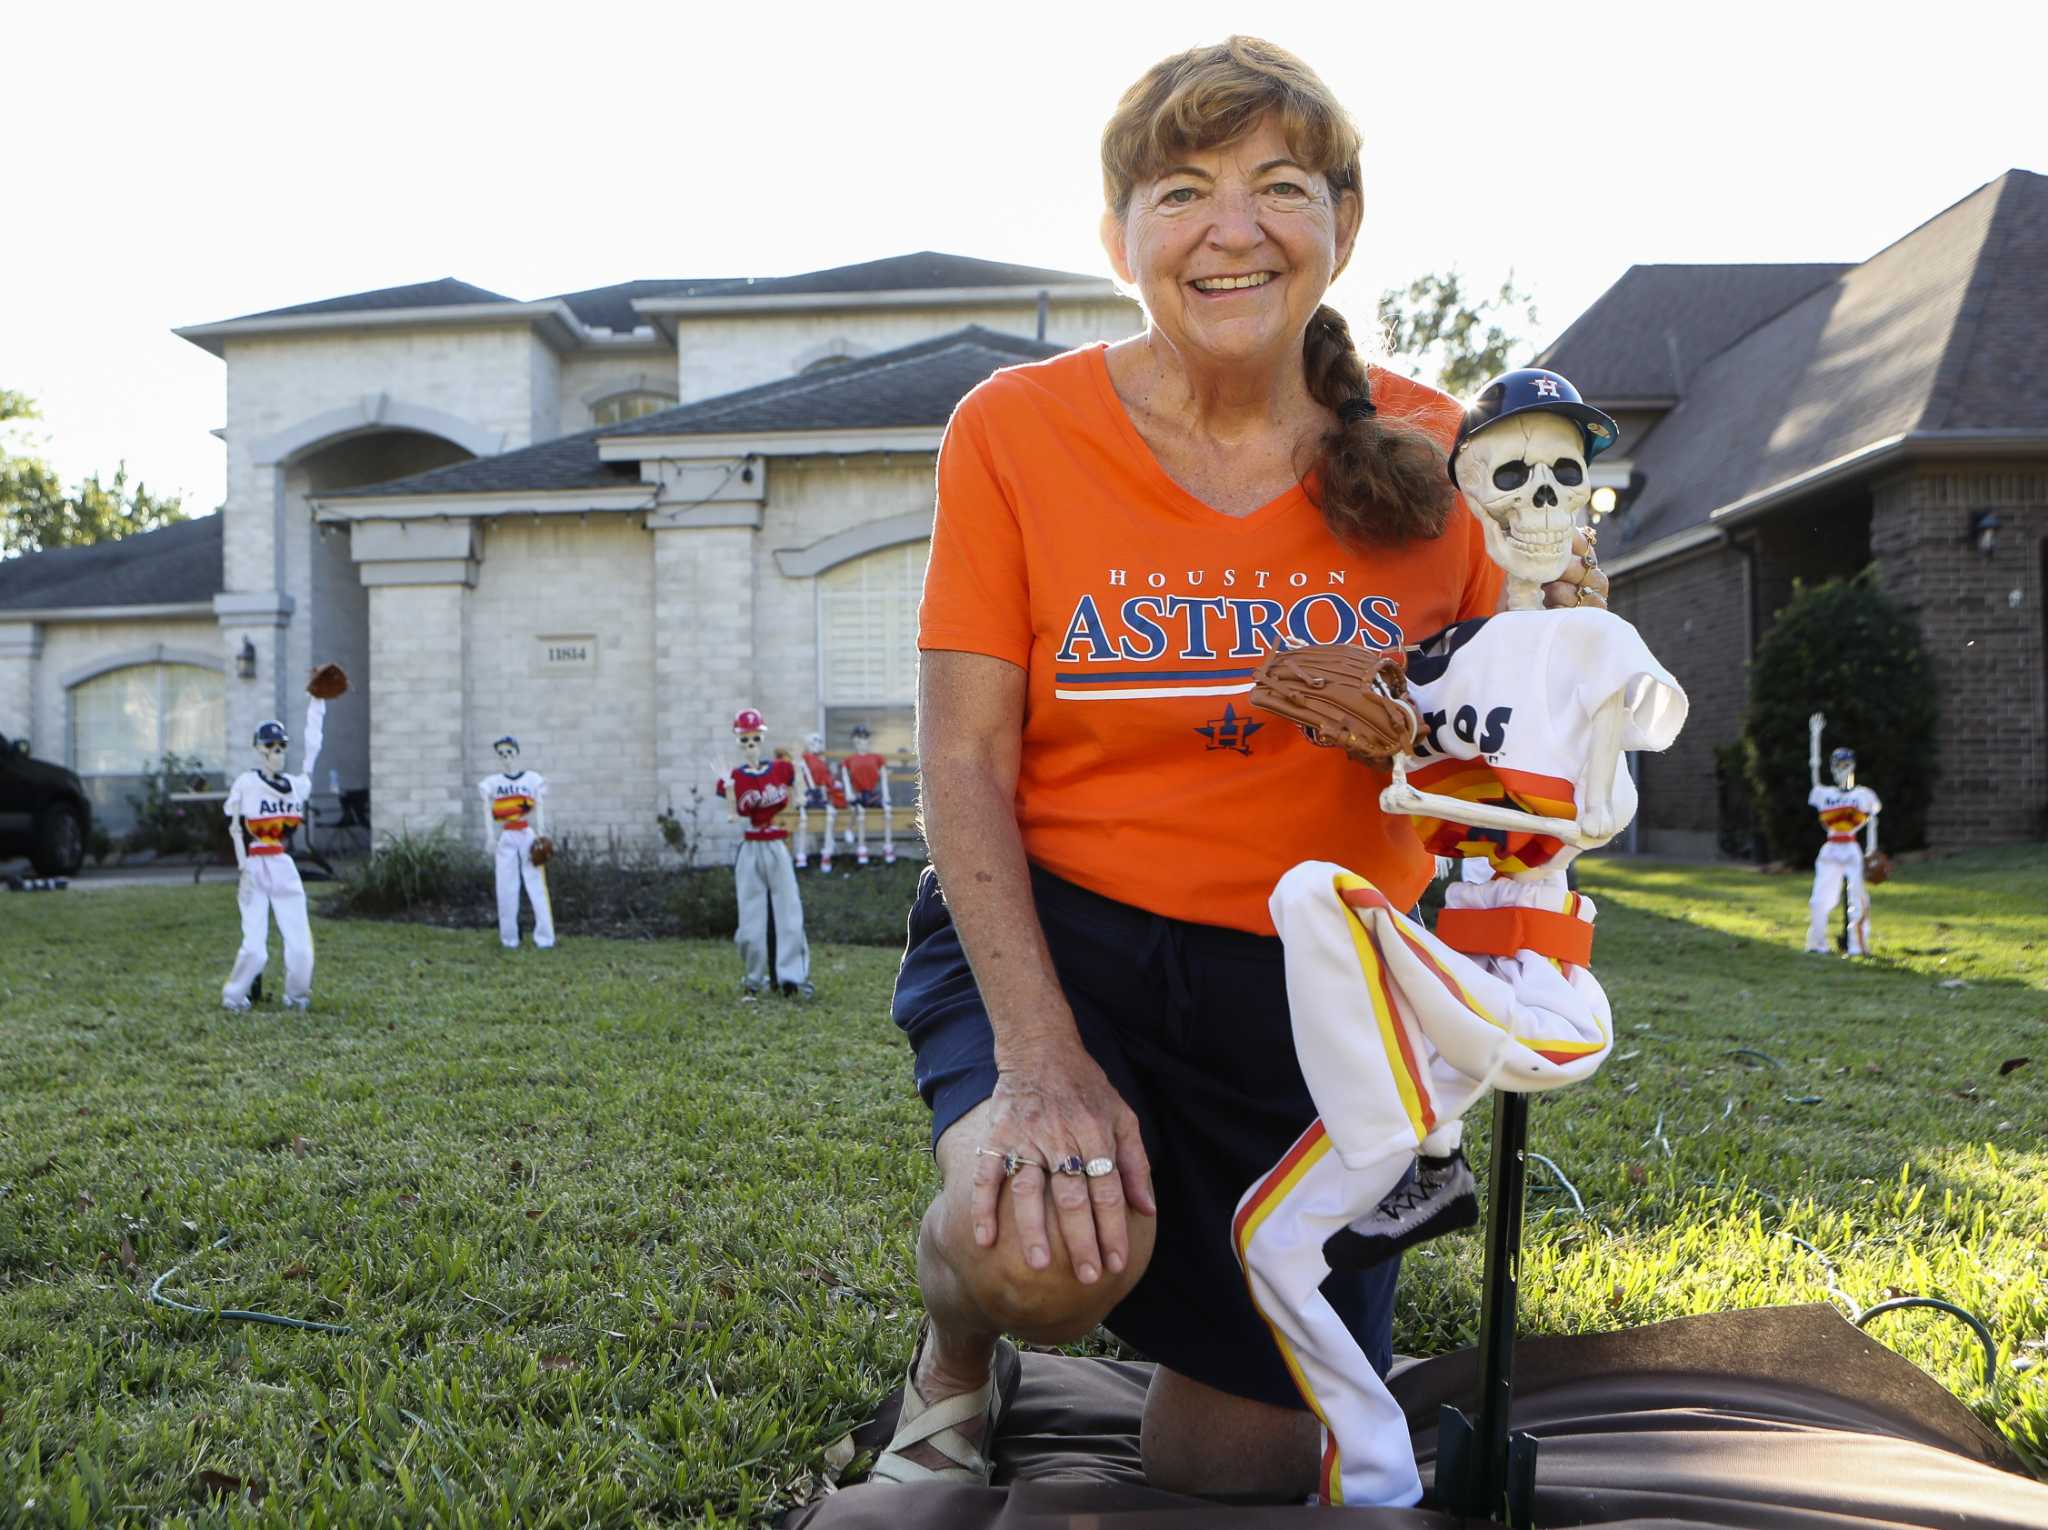 Houston couple uses skeletons to chart Astros' World Series path